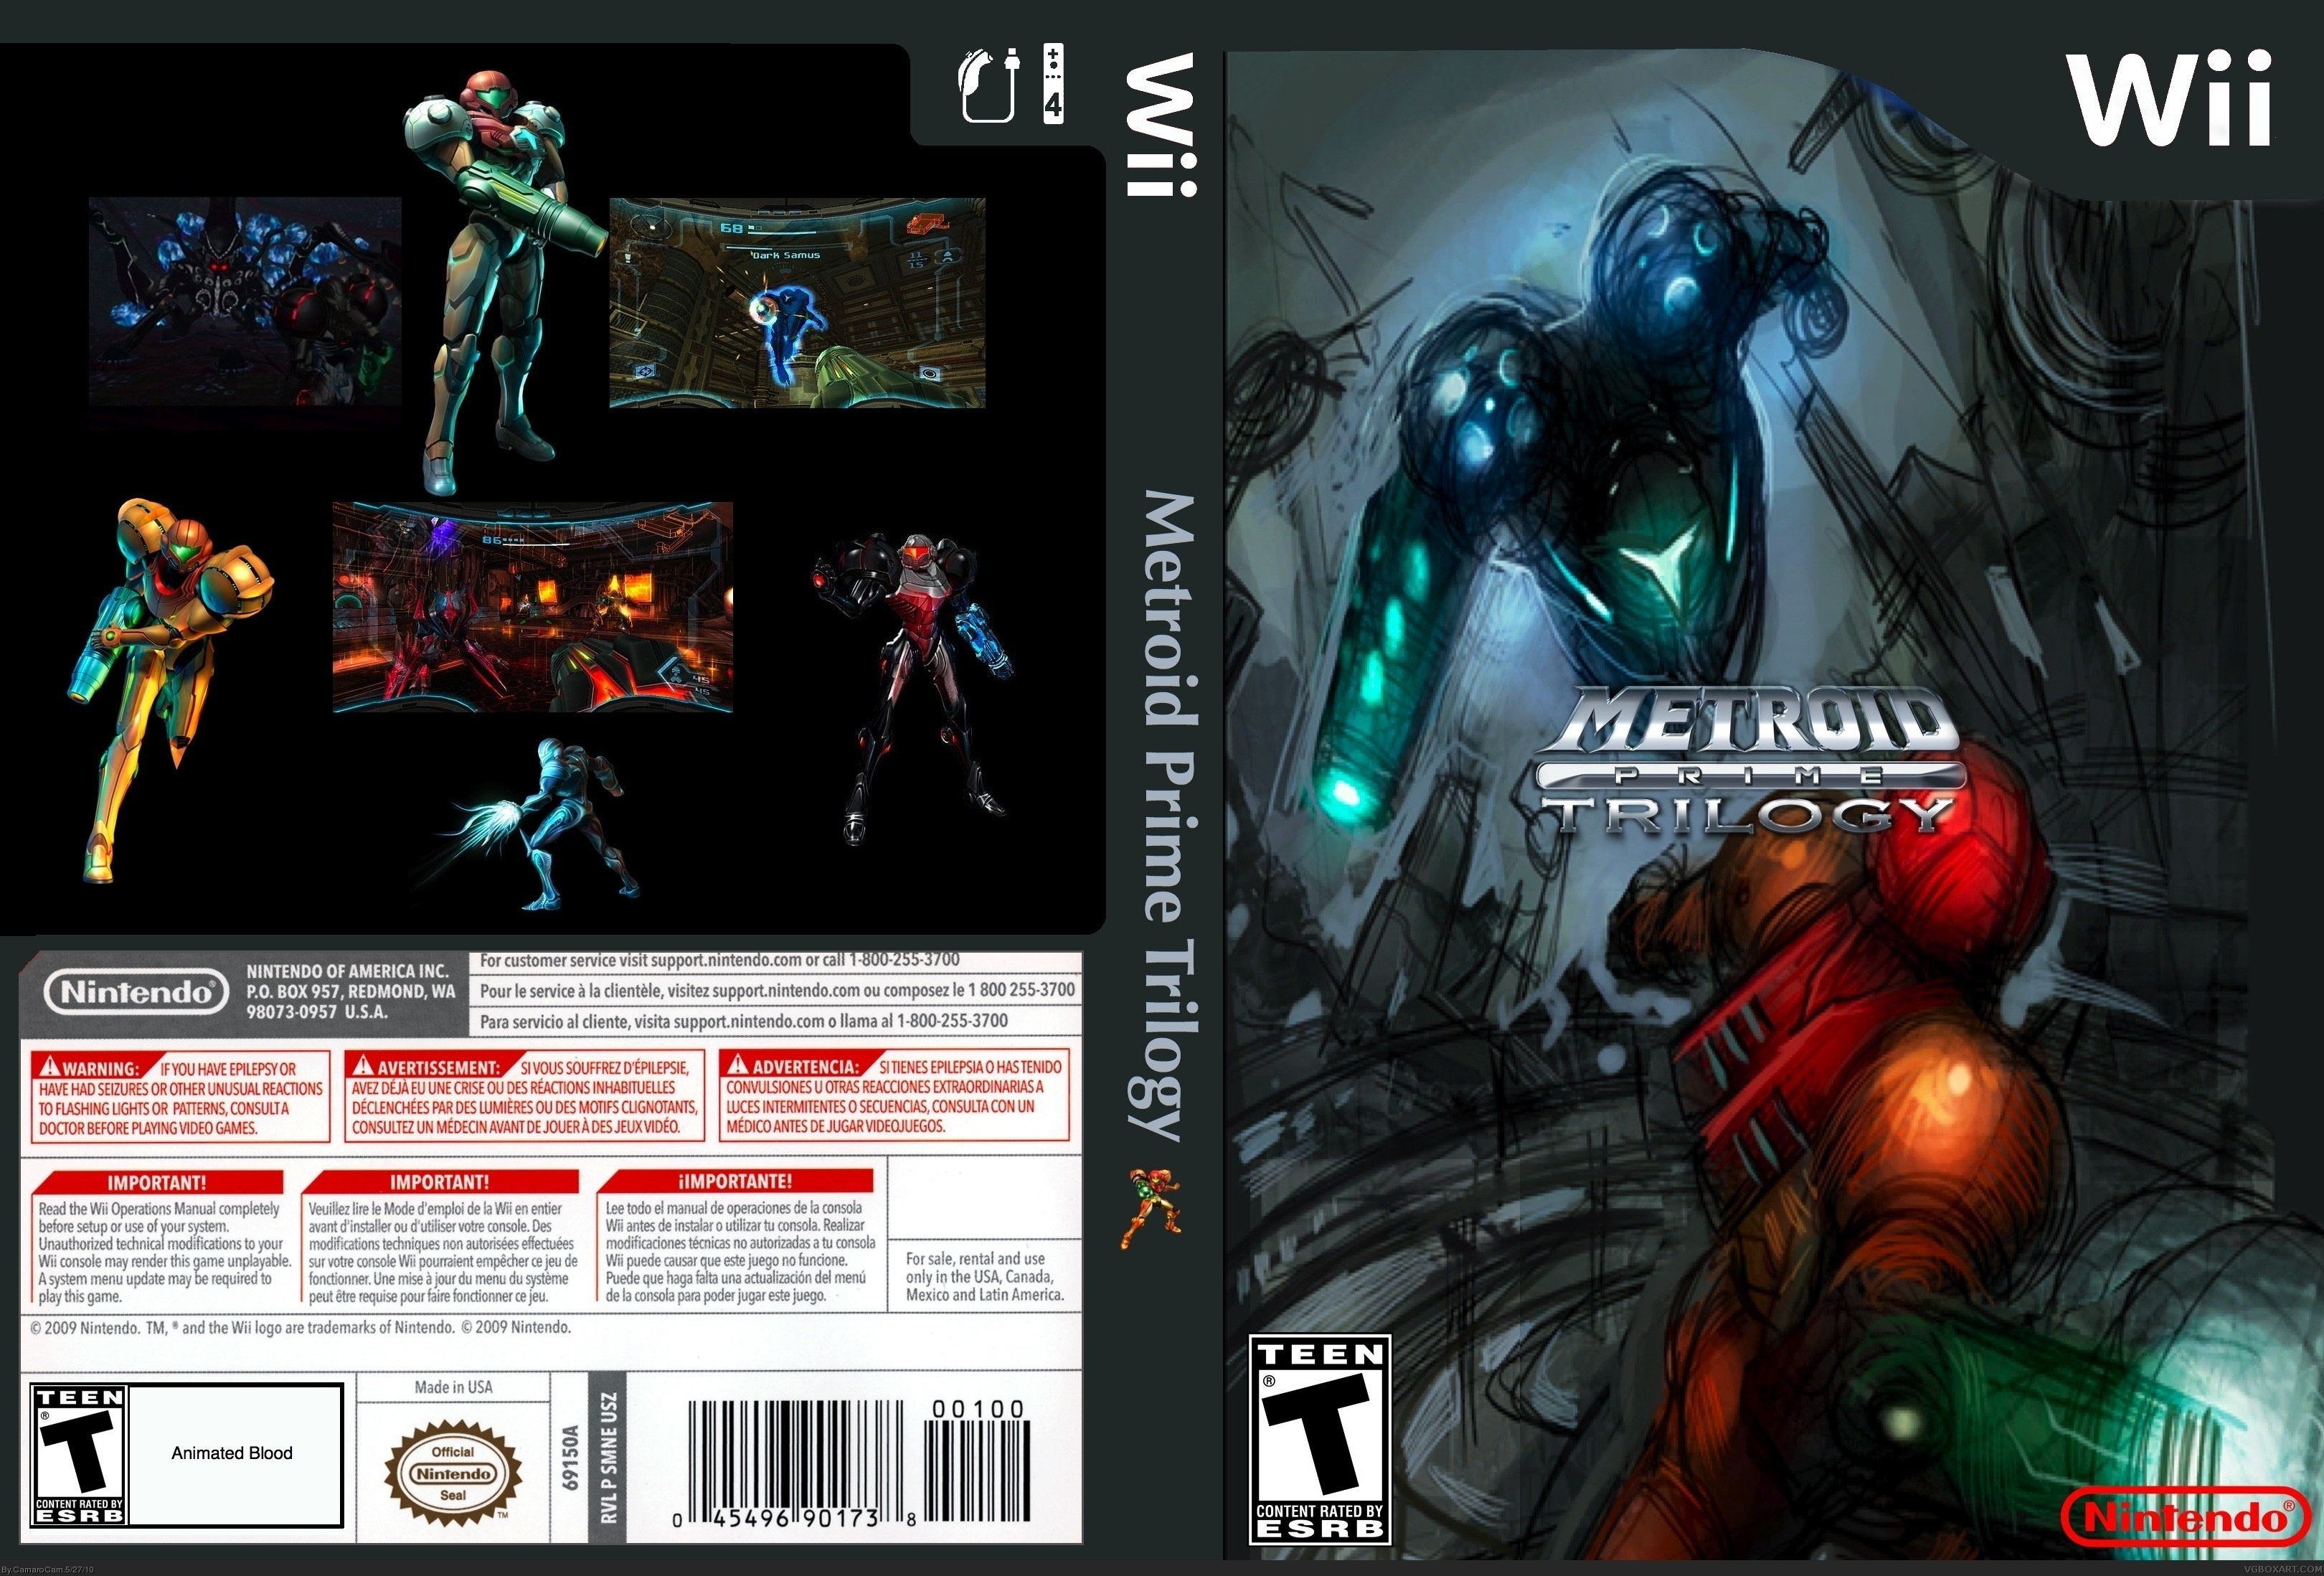 Viewing full size Metroid Prime Trilogy box cover.